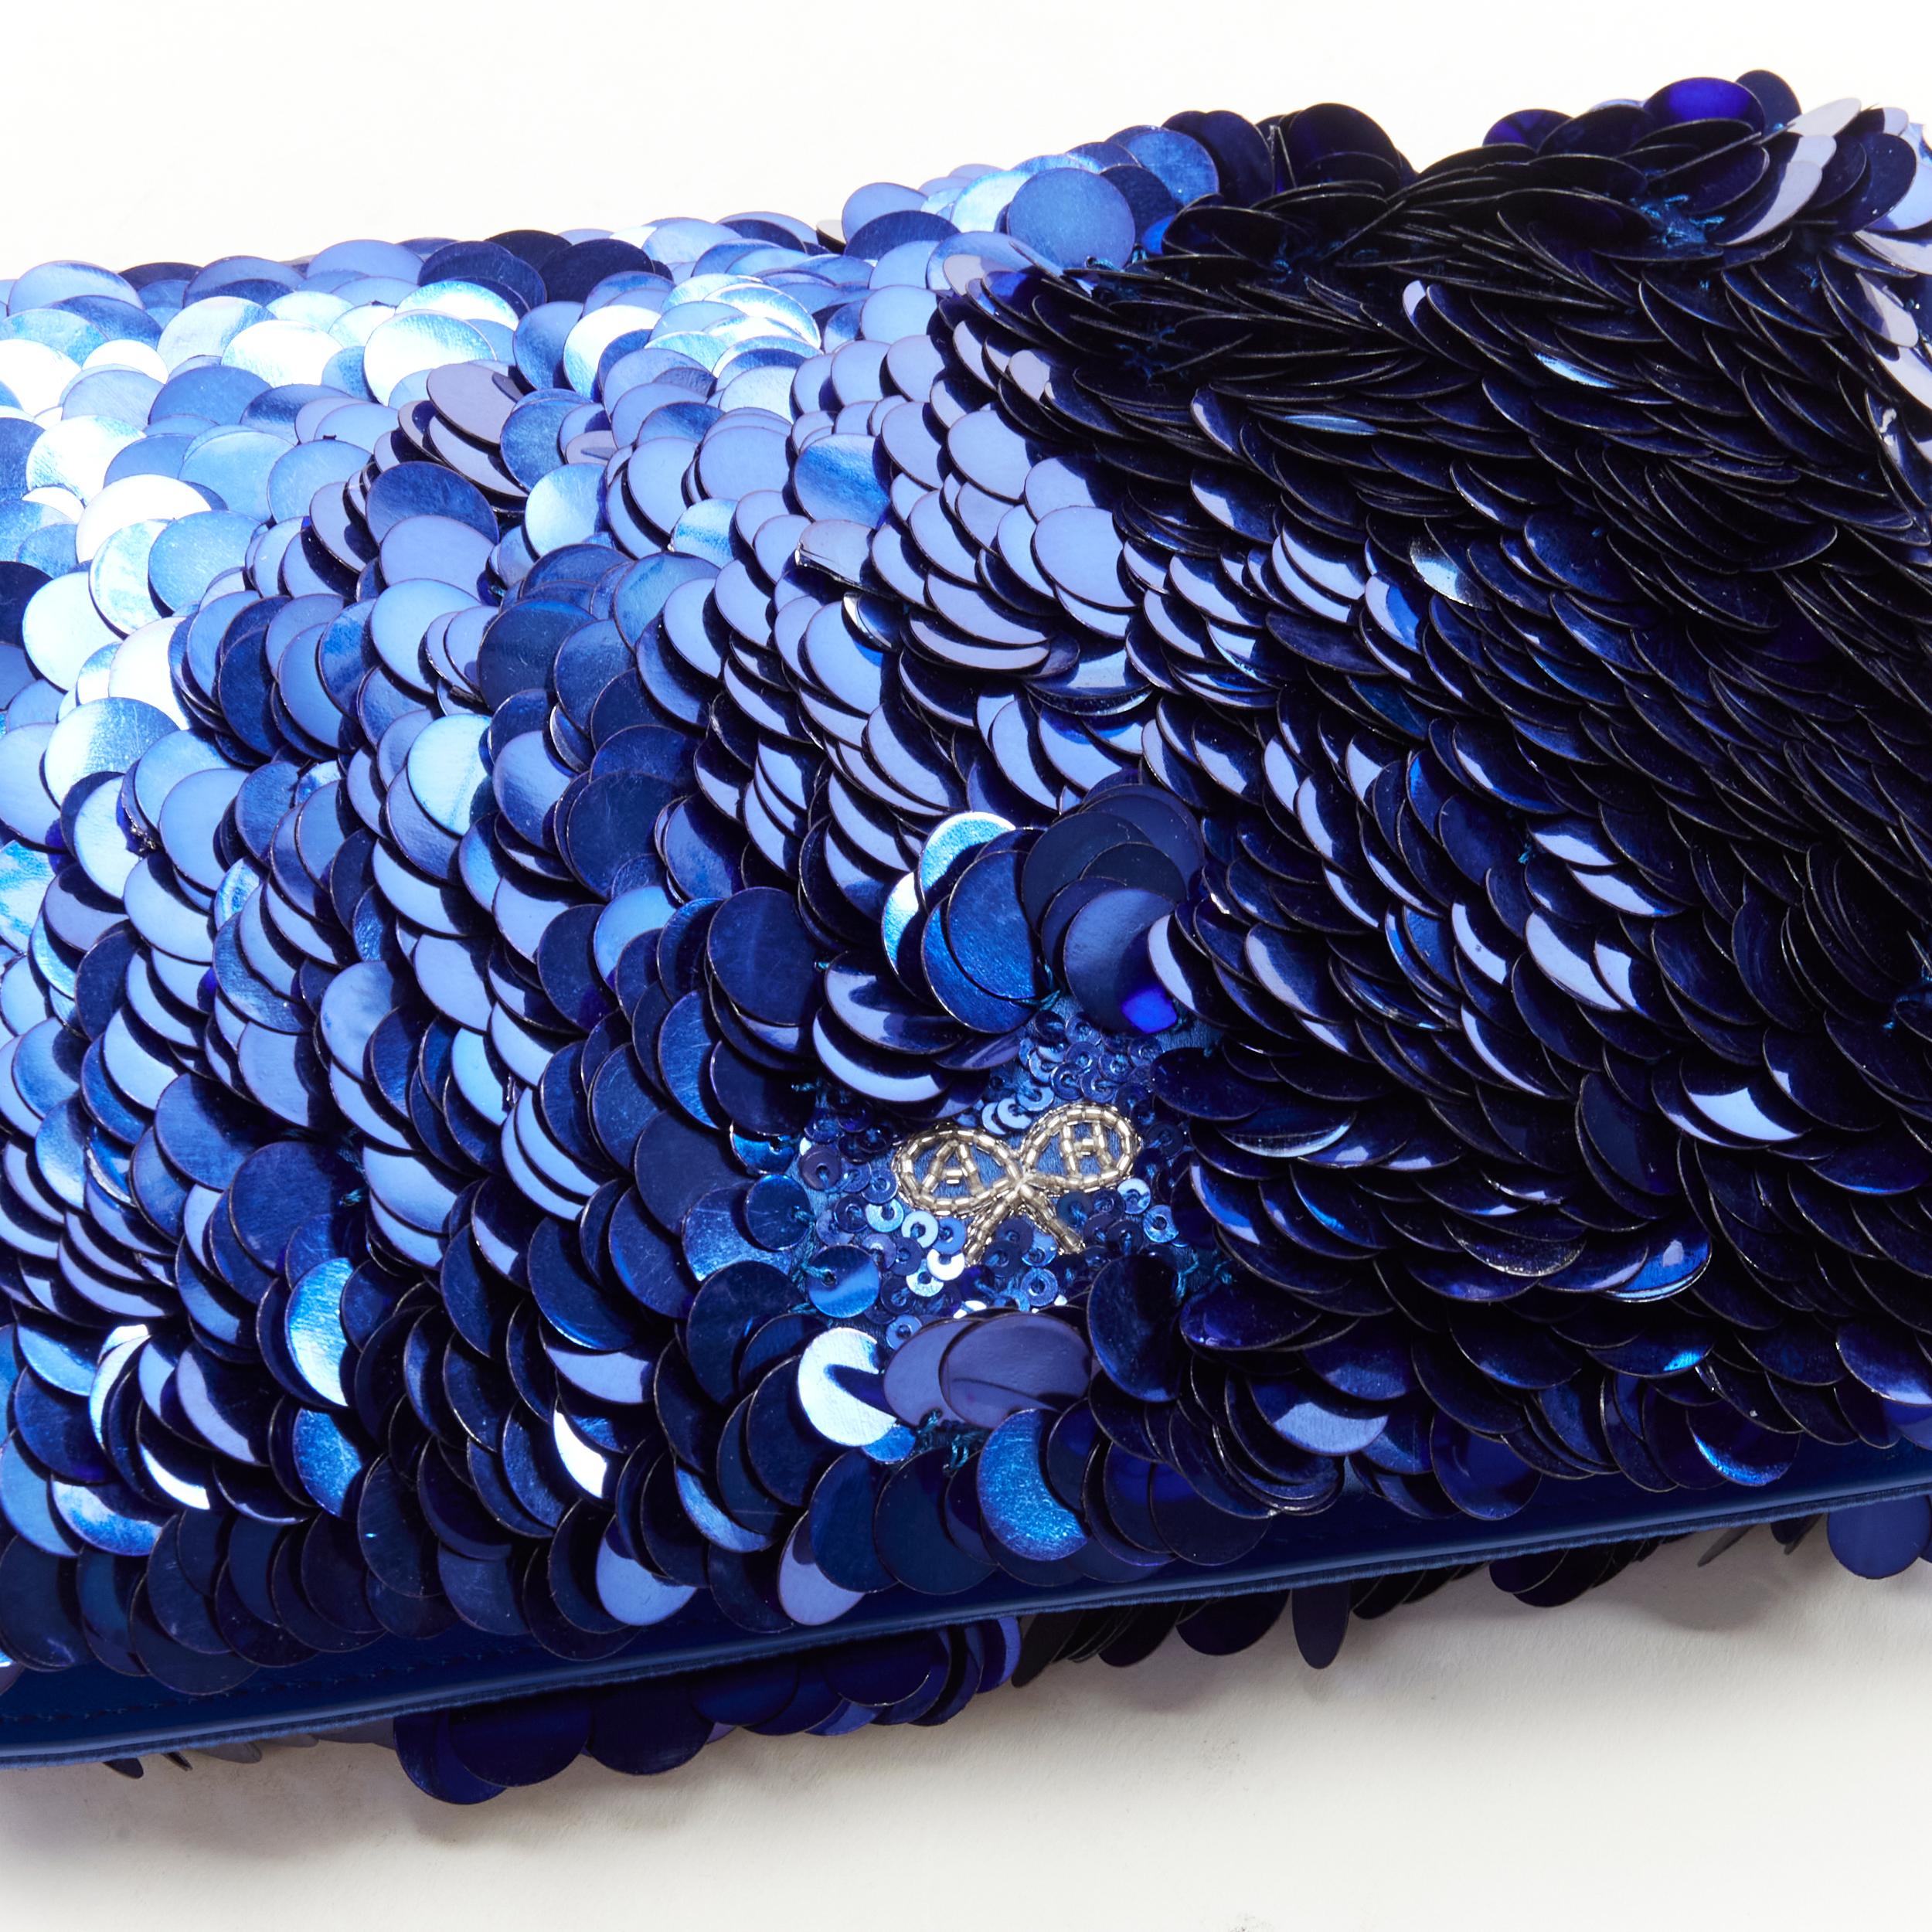 ANYA HINDMARCH Walkers Cheese Onion Chips blue sequins crystal clutch bag 1